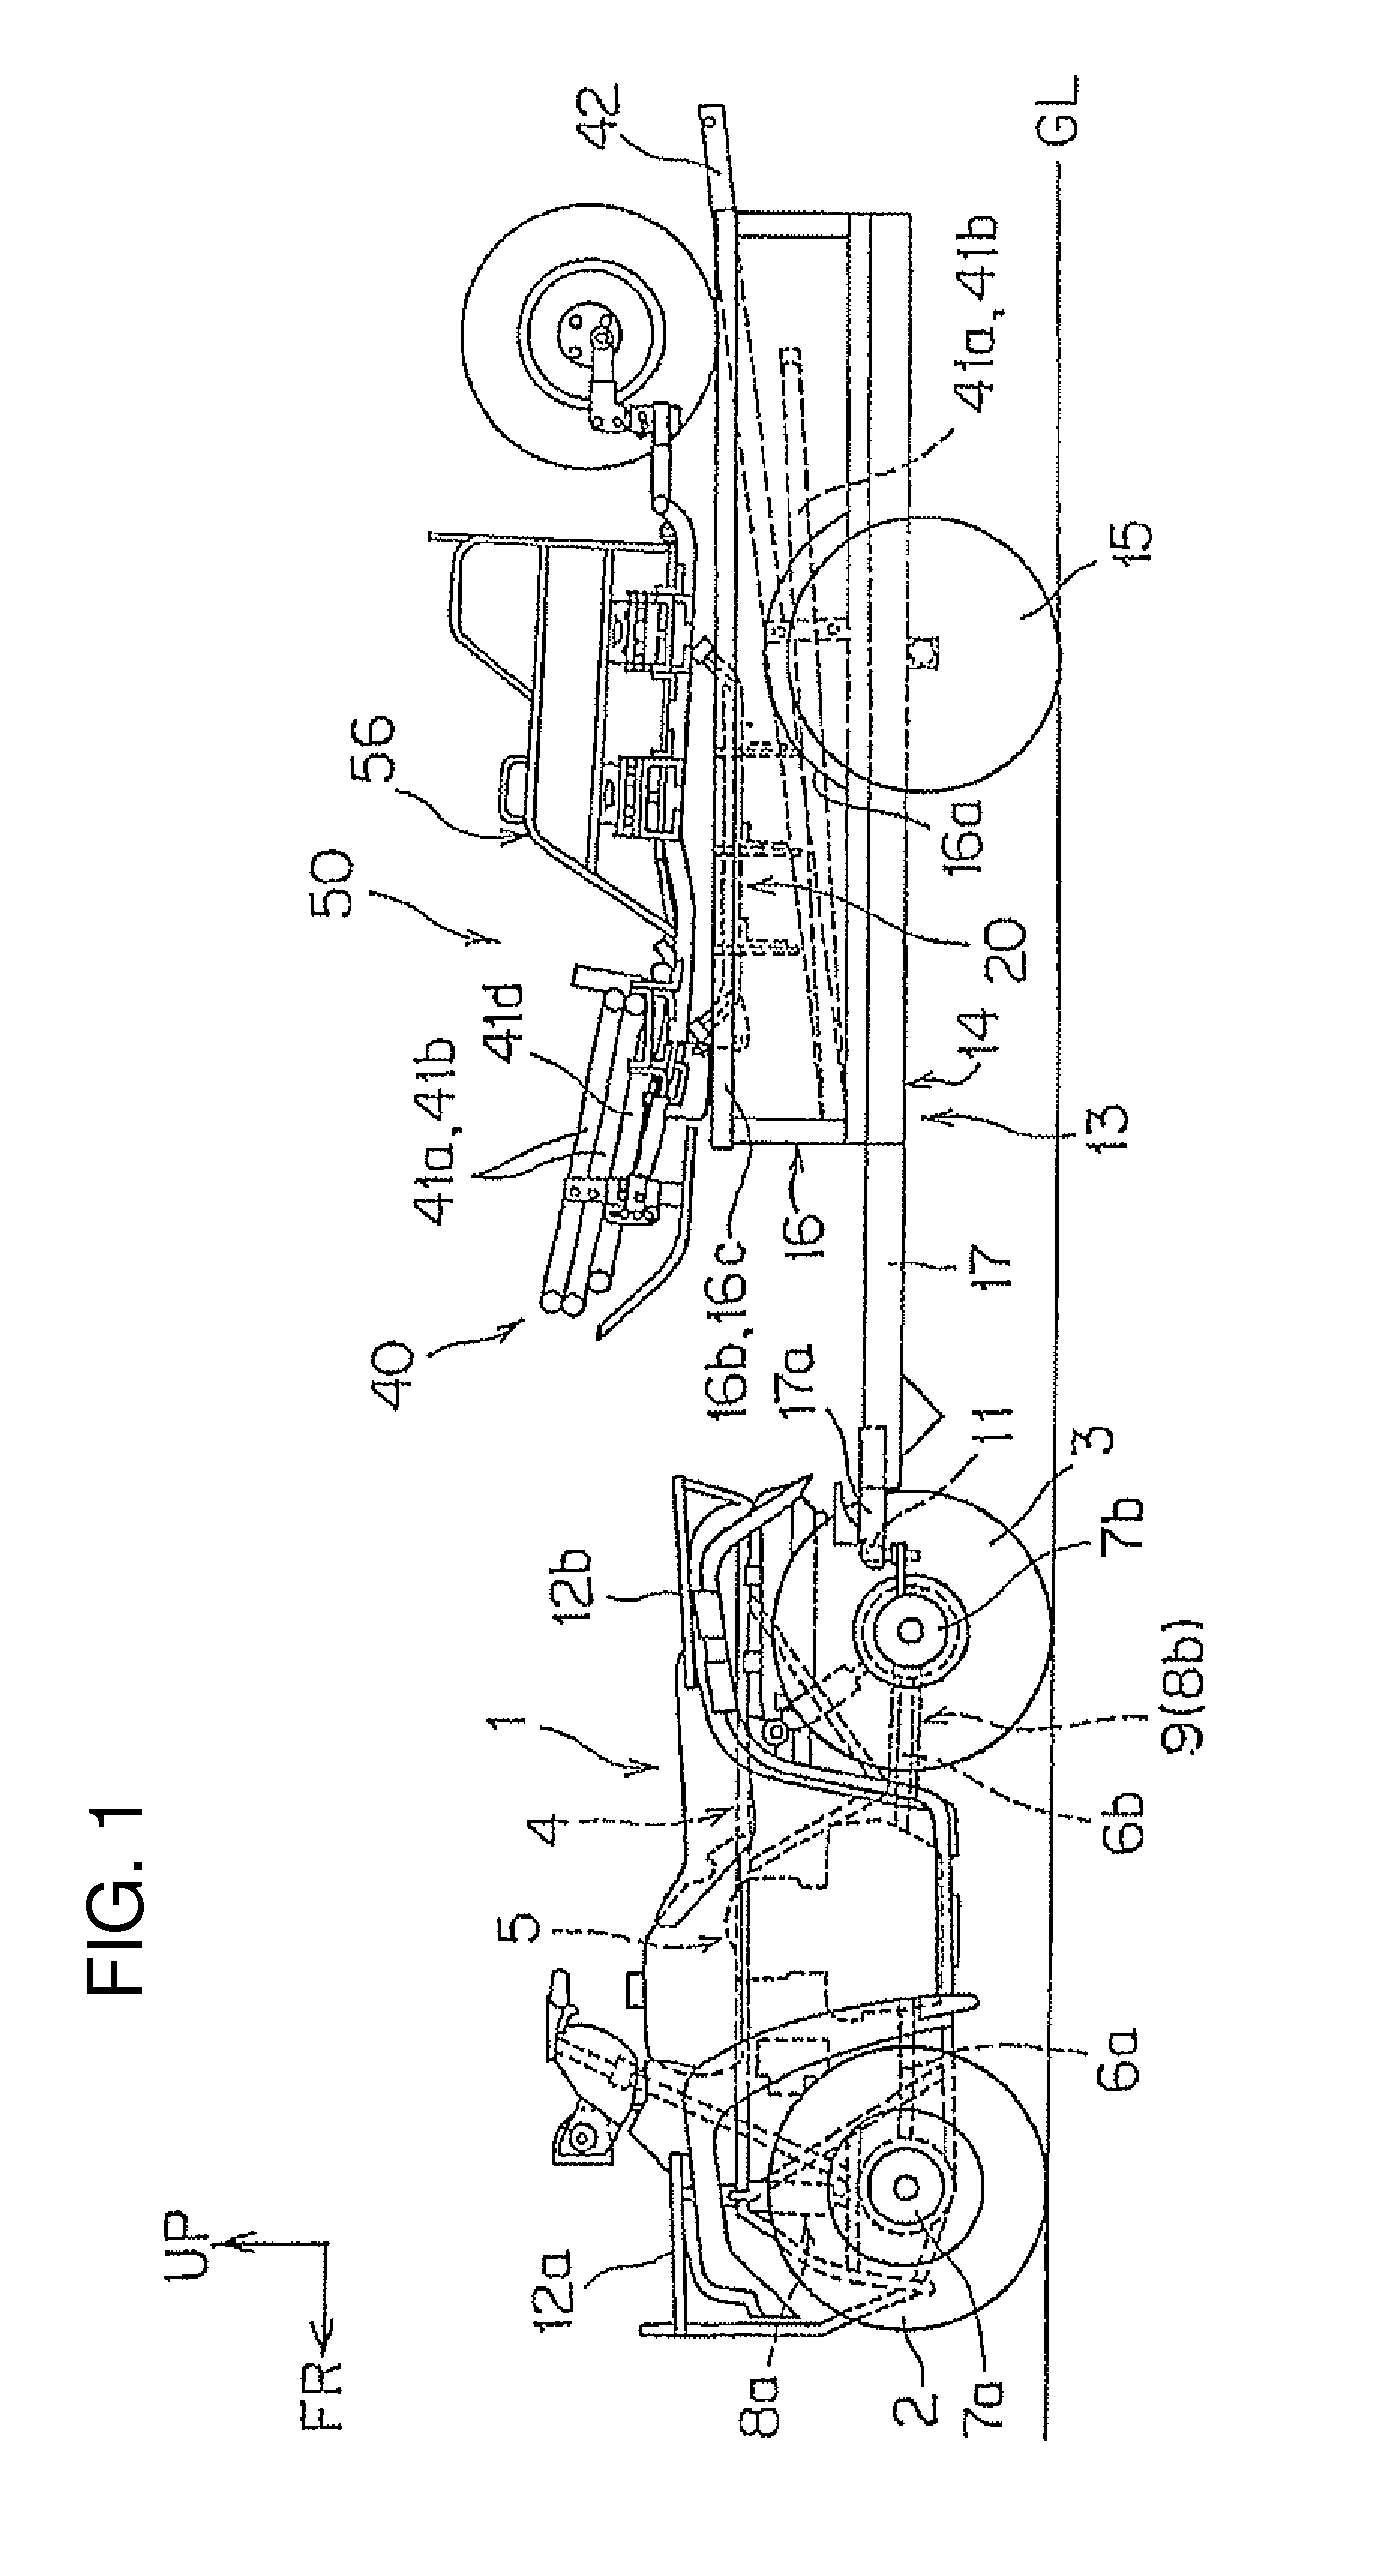 Beach-cleaning system for separating litter from sand, trailer incorporating same, and method of using same